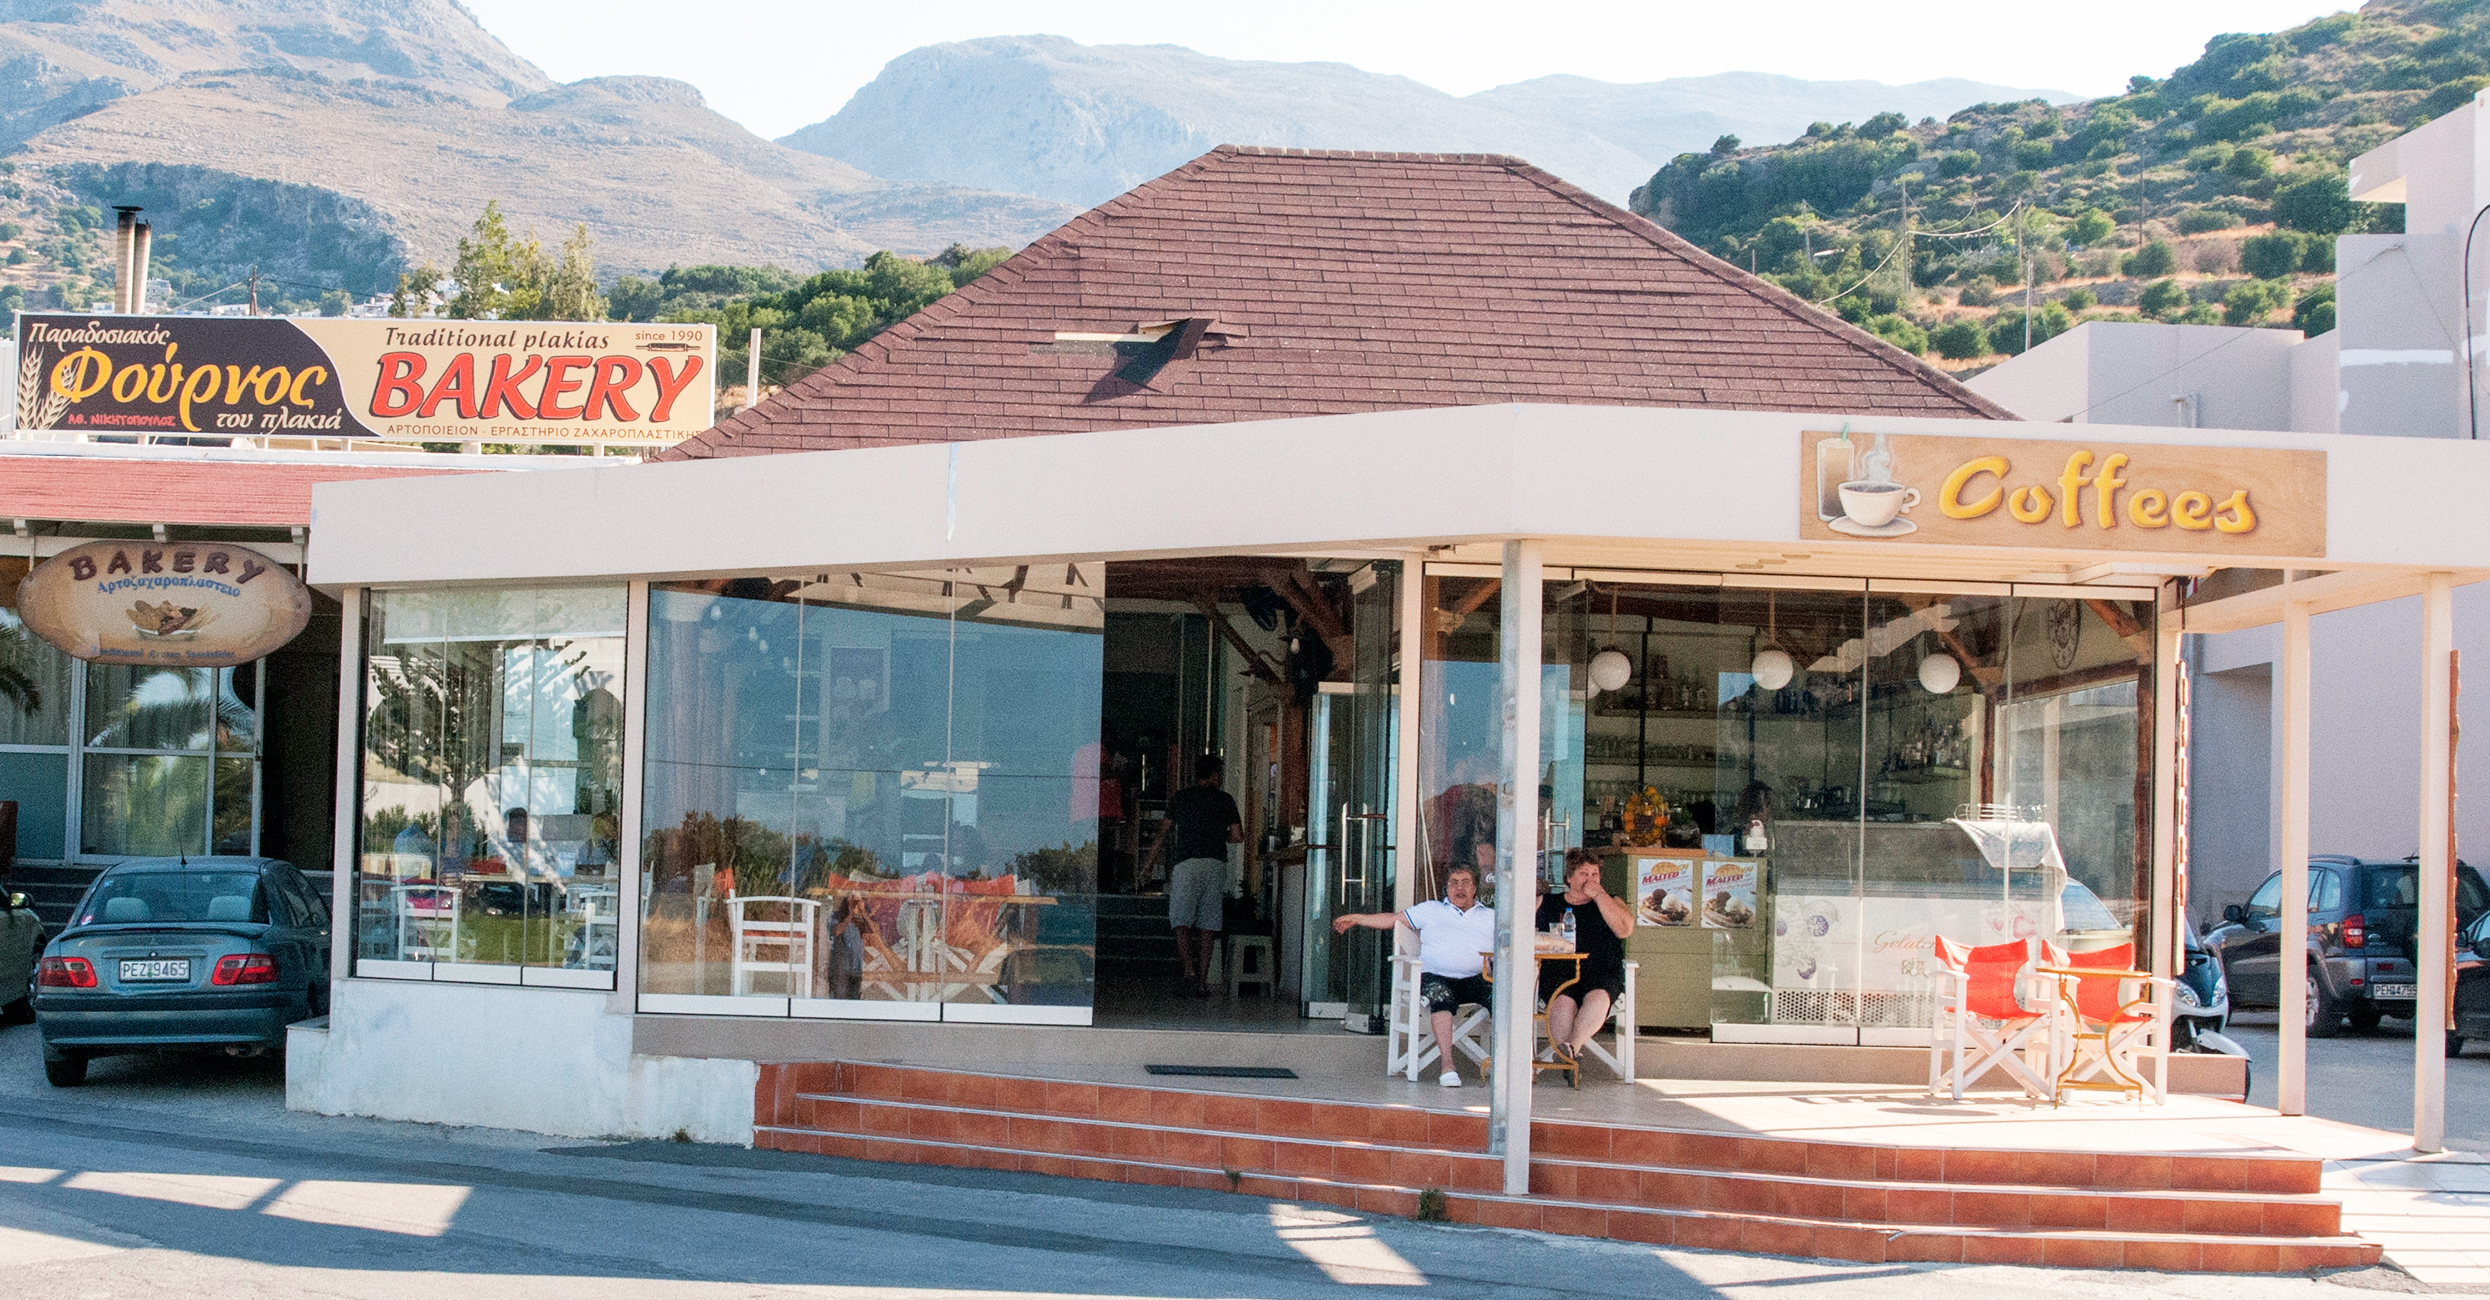 Traditional Plakias Bakery since 1990 the original bakery in Rethymno Crete